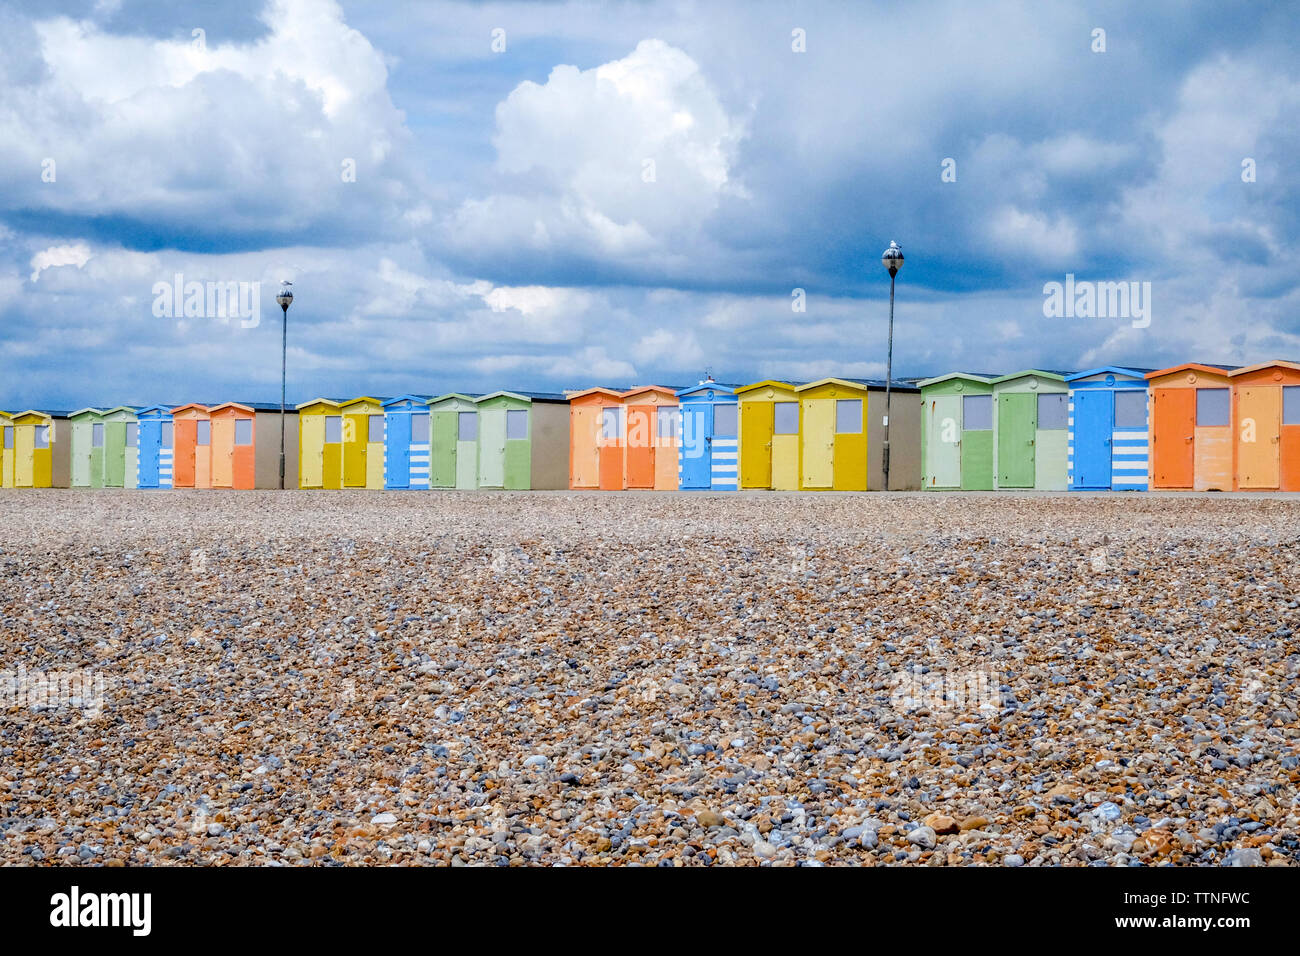 A line of 22 colourful beach huts running through the centre of the image, below is a yellow pebble beach and above is a dramatic blue and white cloud Stock Photo